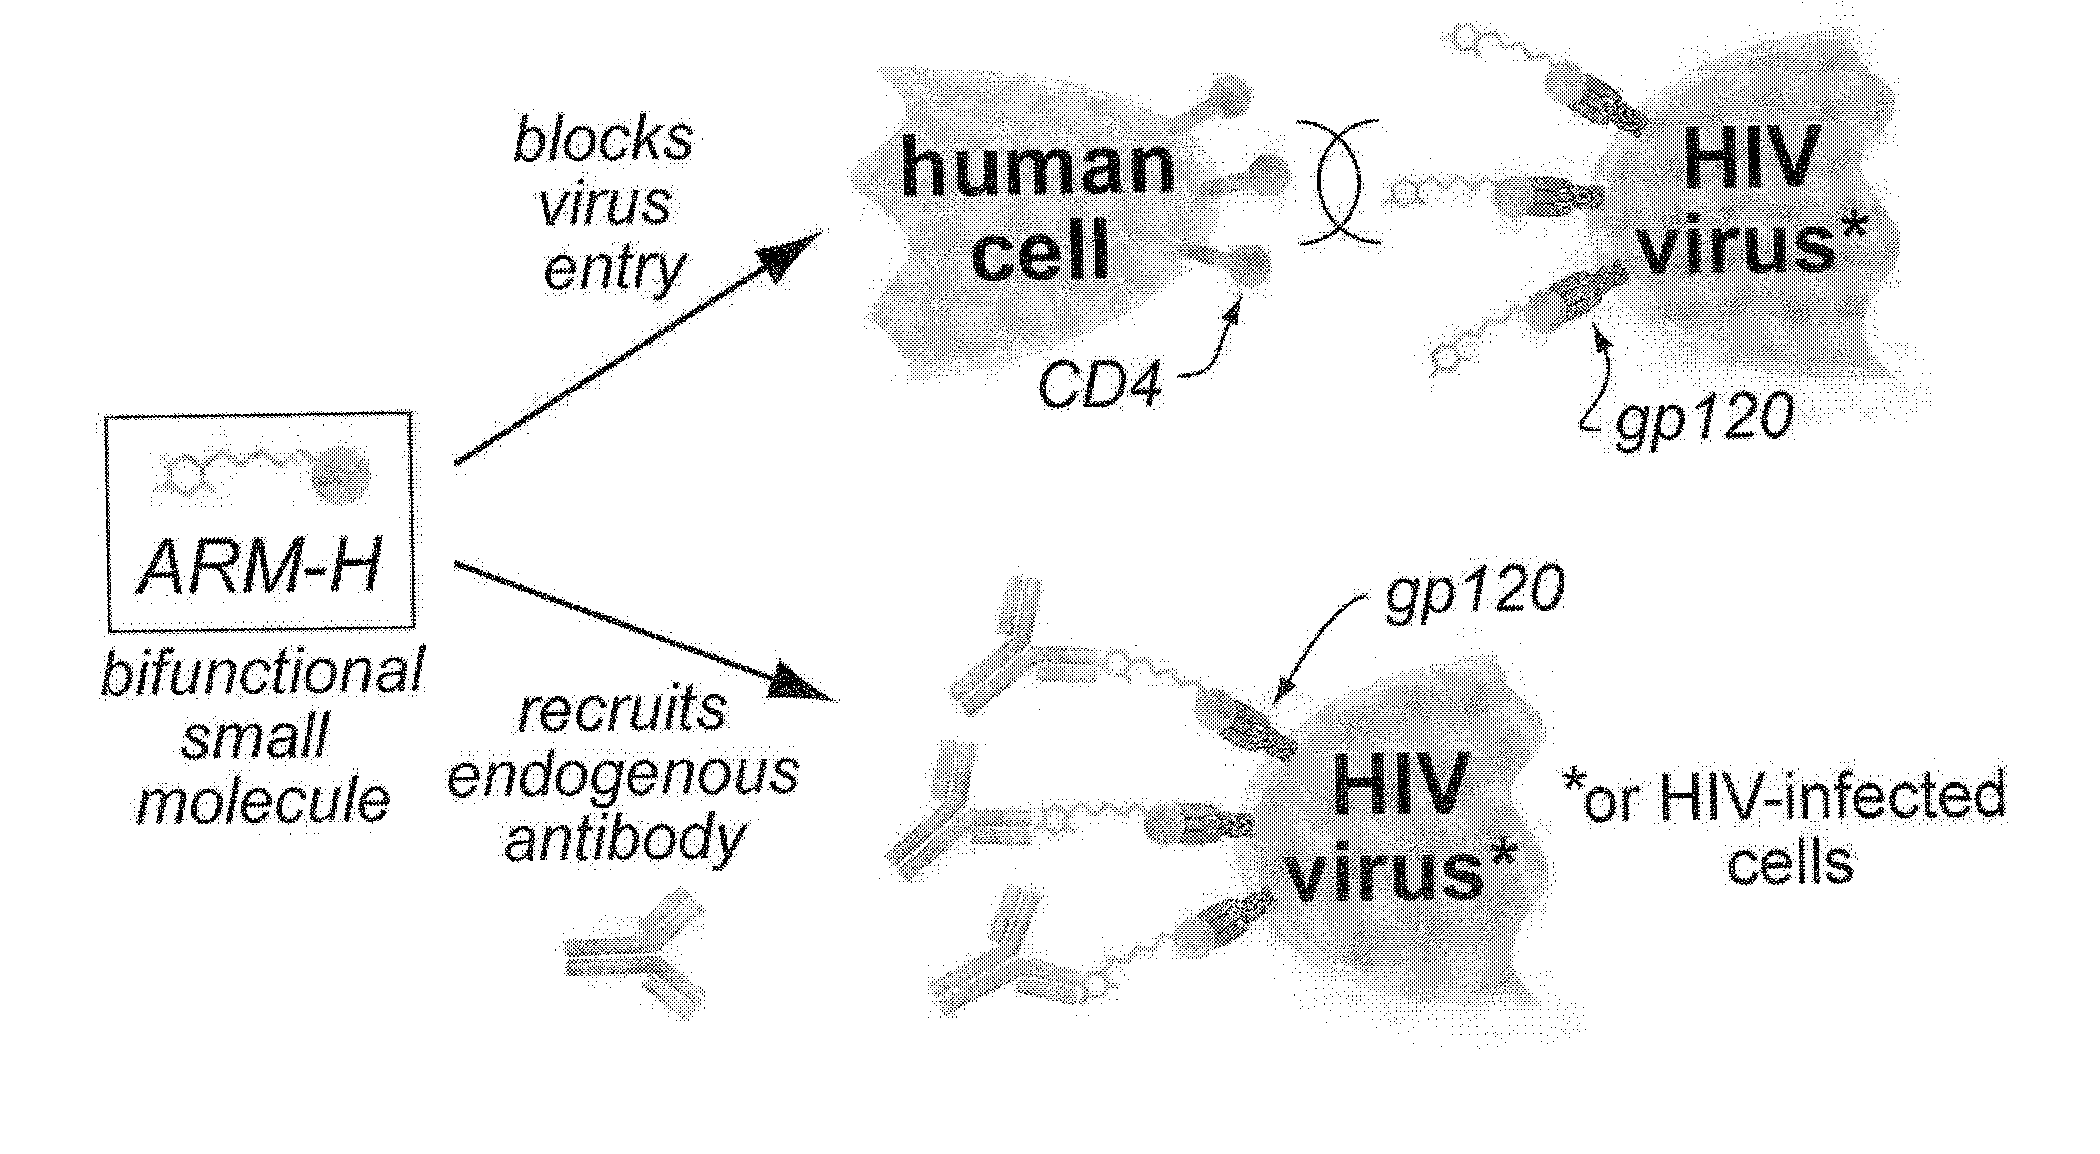 Bifunctional molecules with antibody-recruiting and entry inhibitory activity against the human immunodeficiency virus